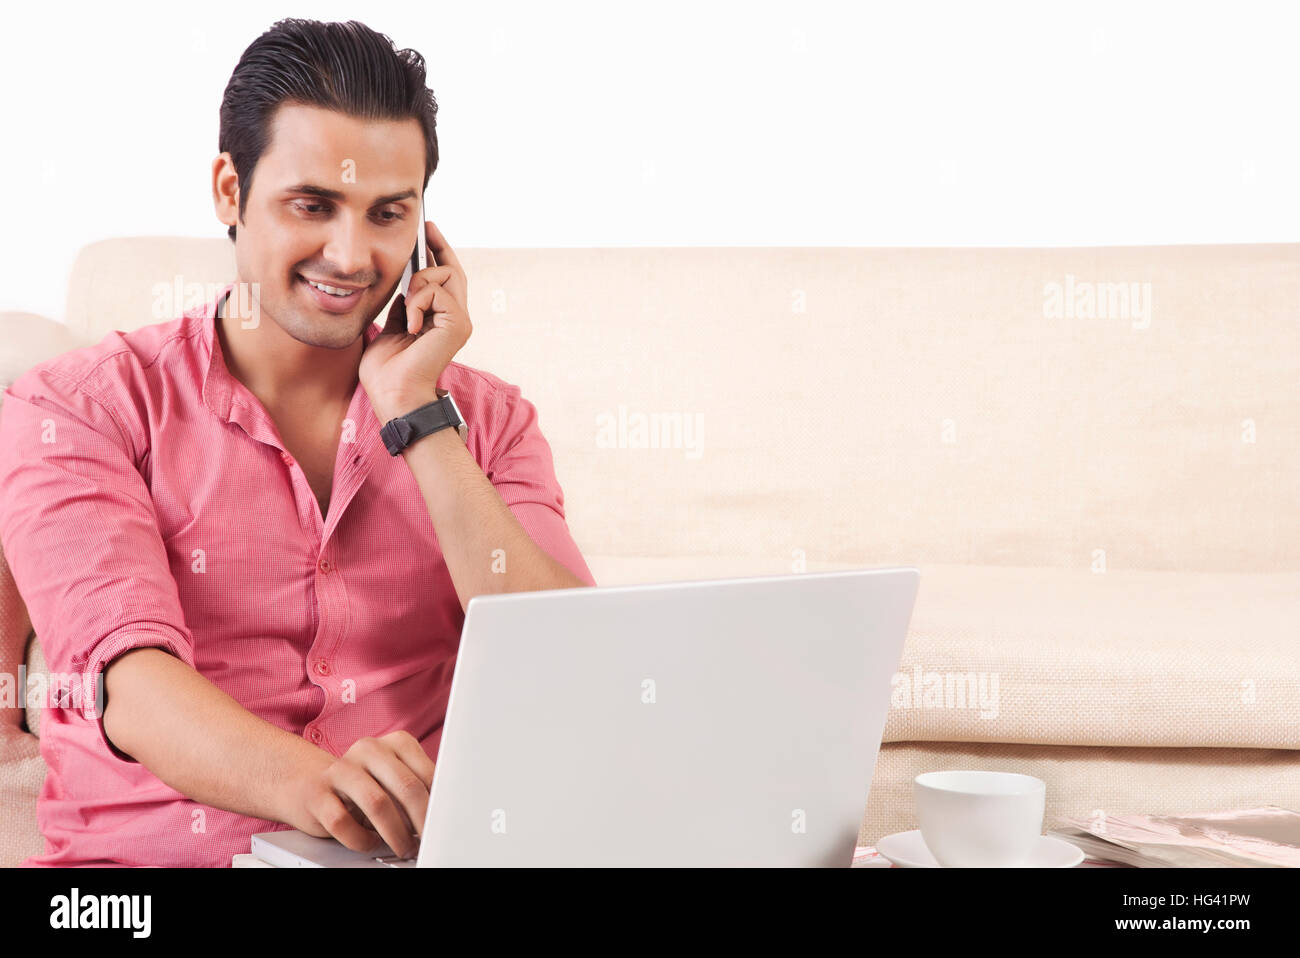 Young man talking on mobile phone while using laptop Stock Photo